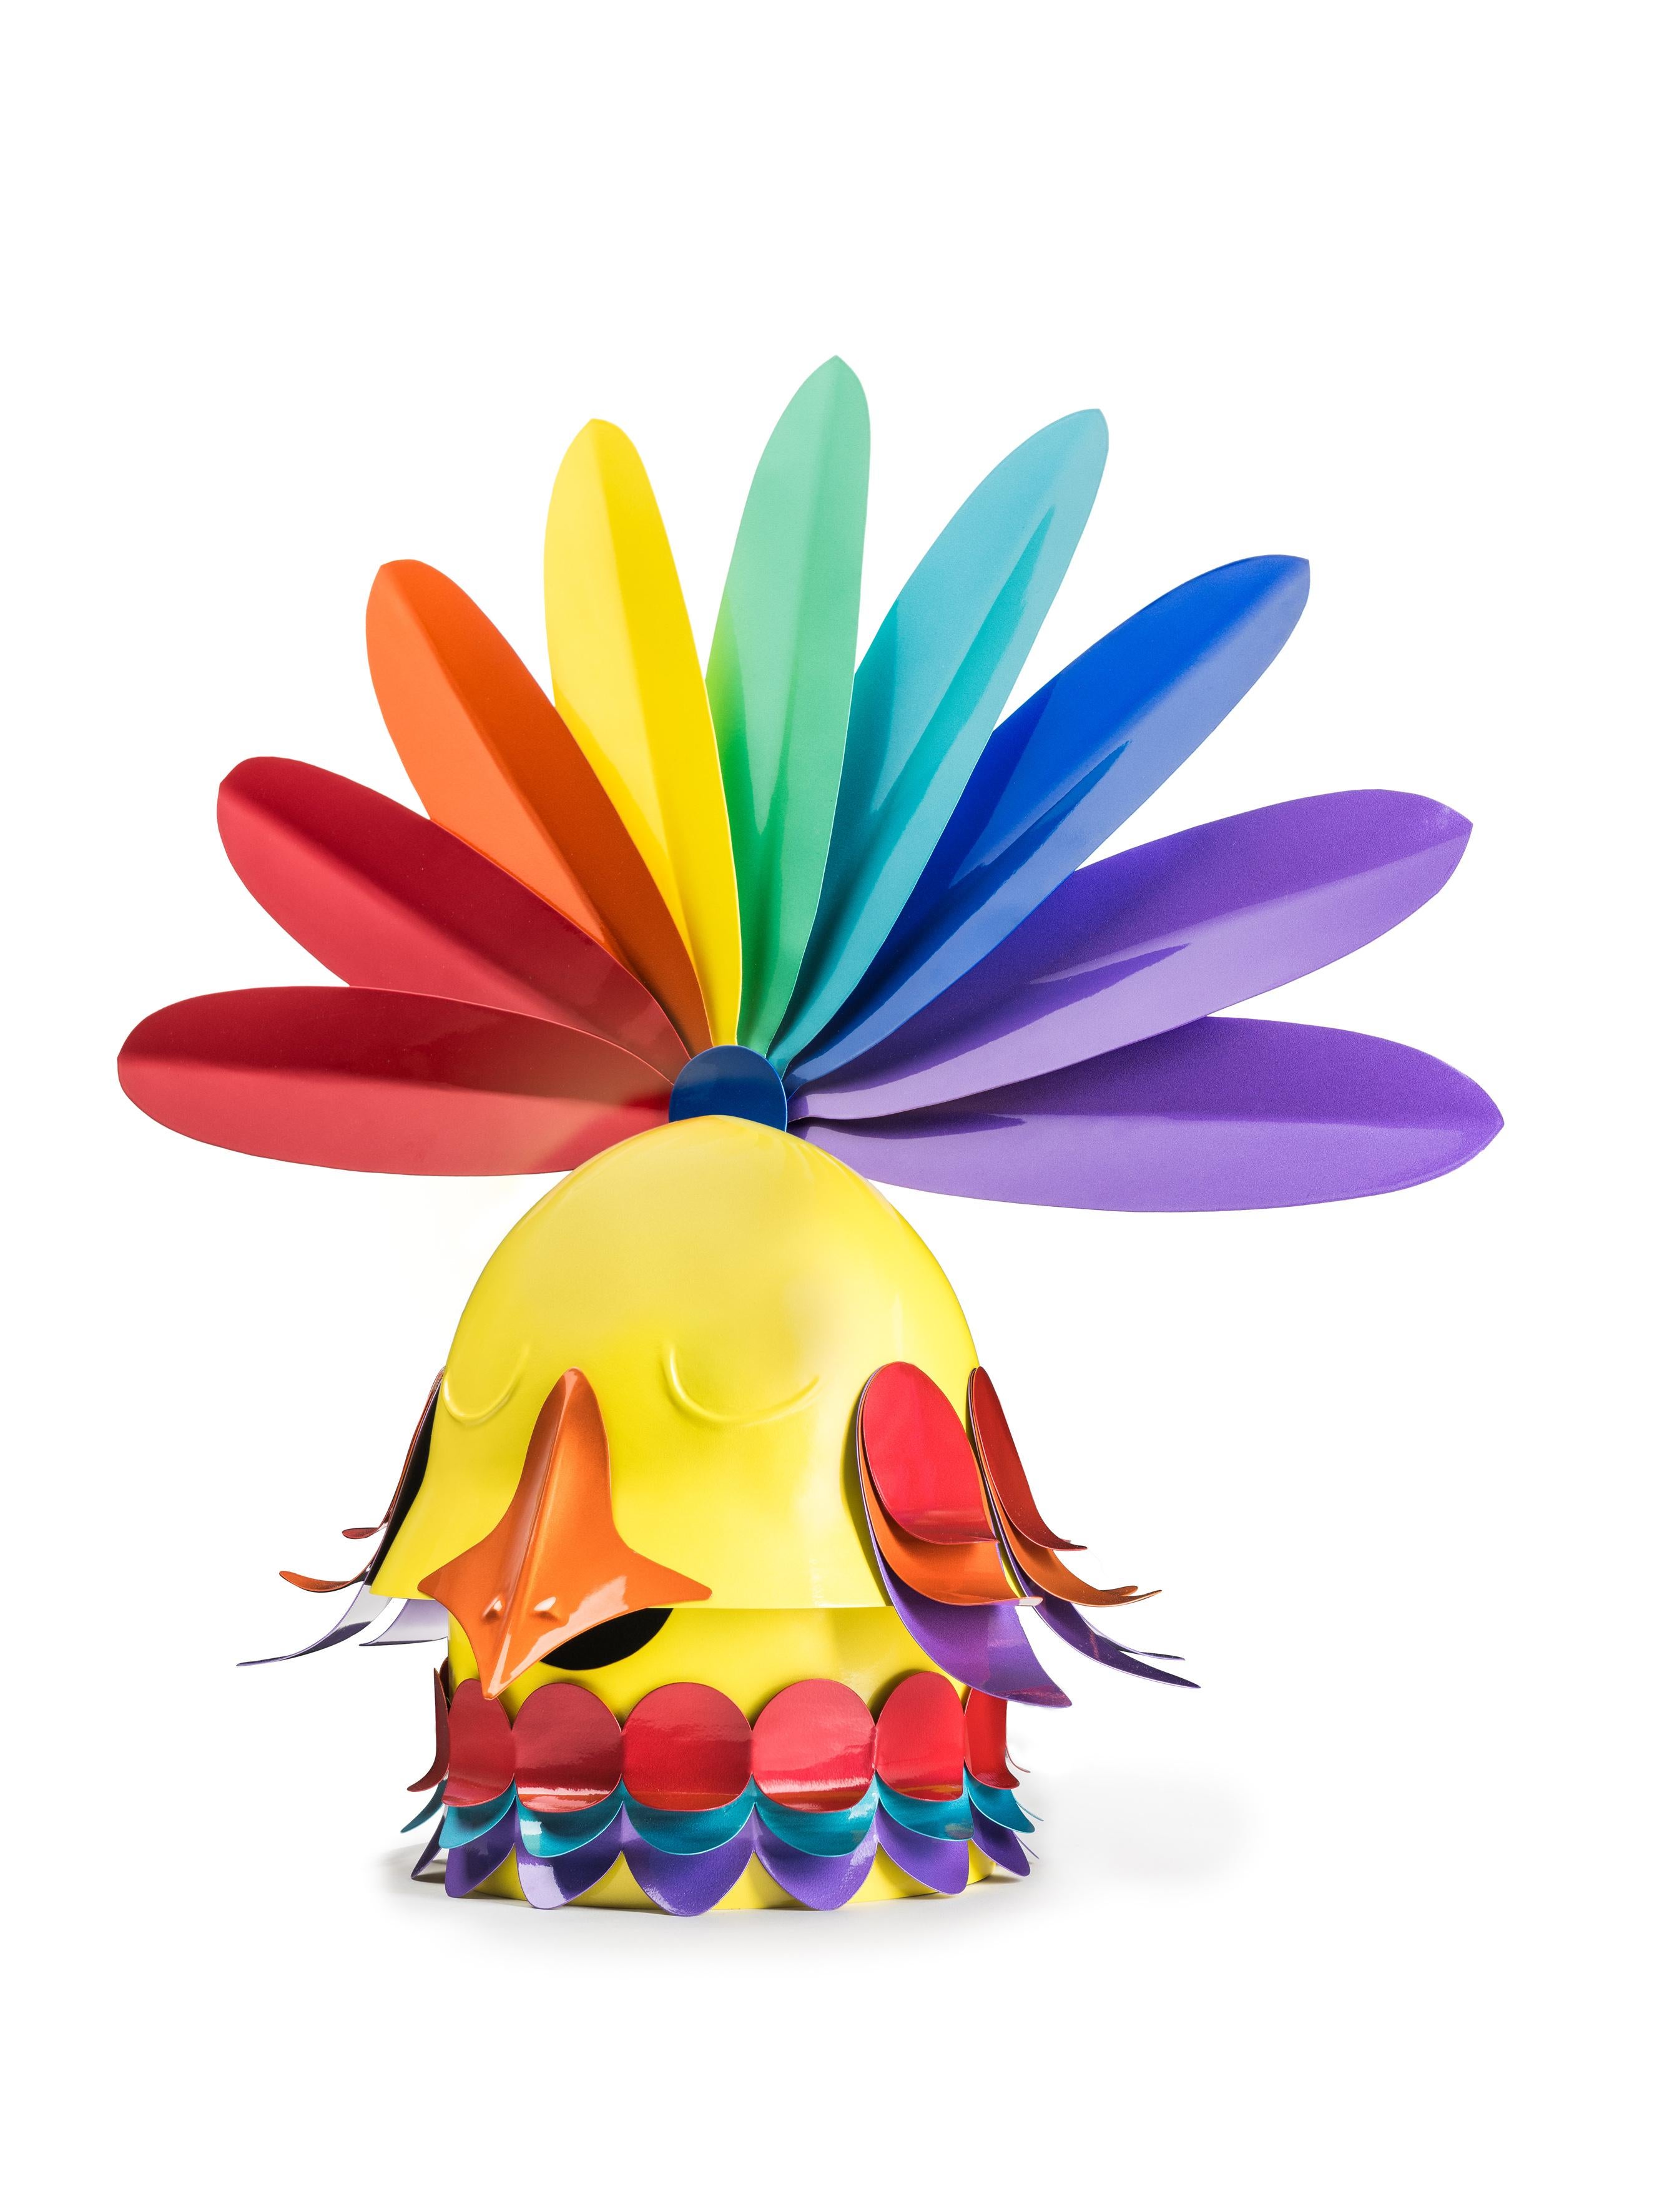 As an hymn to joy, the cheerful cock greets the sun waving its beautiful multicolour feathers.
Gallo belongs to the Raw&Rainbow collection of 10 sculptures in limited edition, celebrating the X anniversary of altreforme.

Pricing excludes VAT.